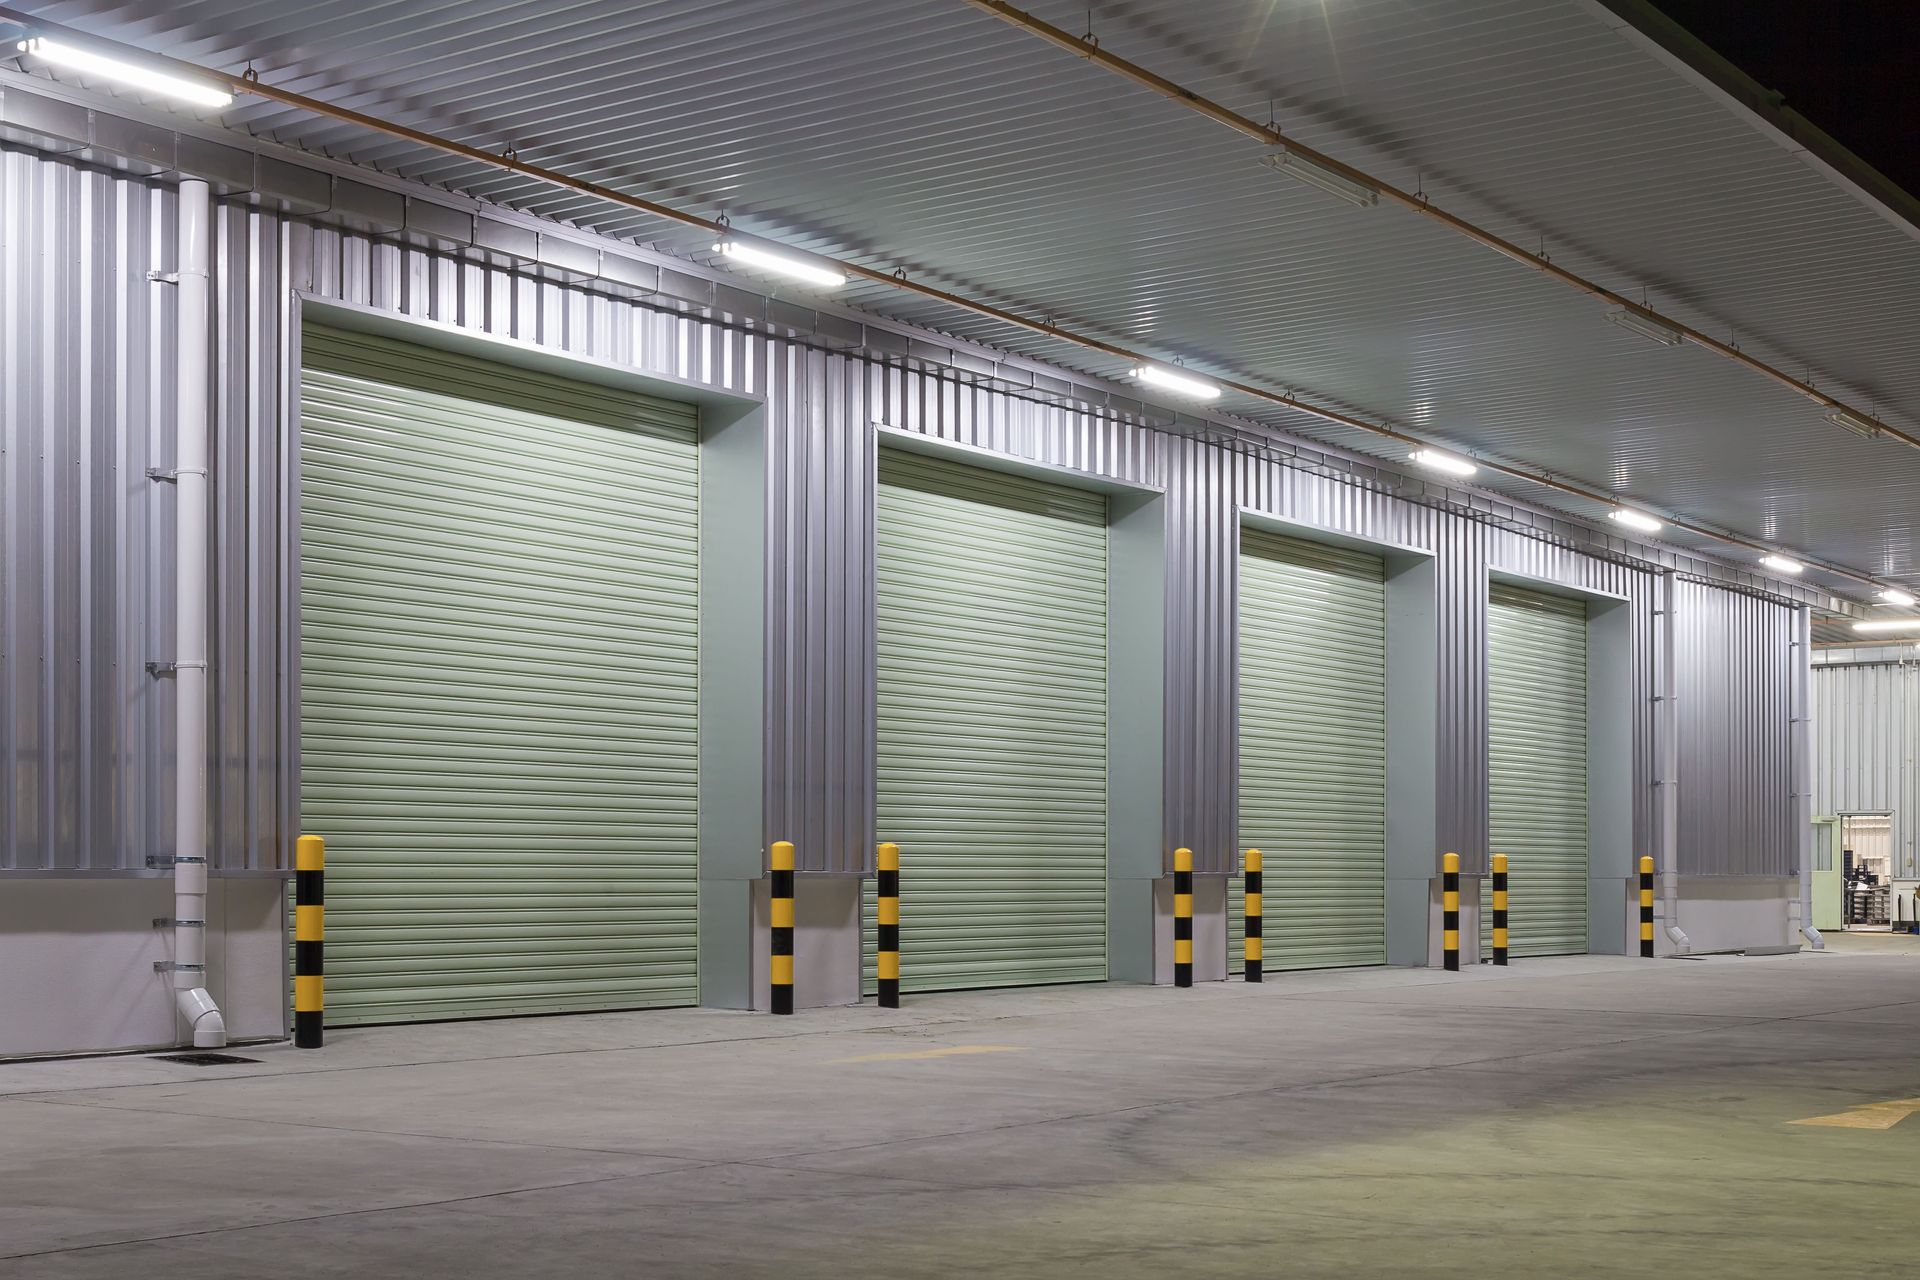 A row of garage doors in a warehouse at night